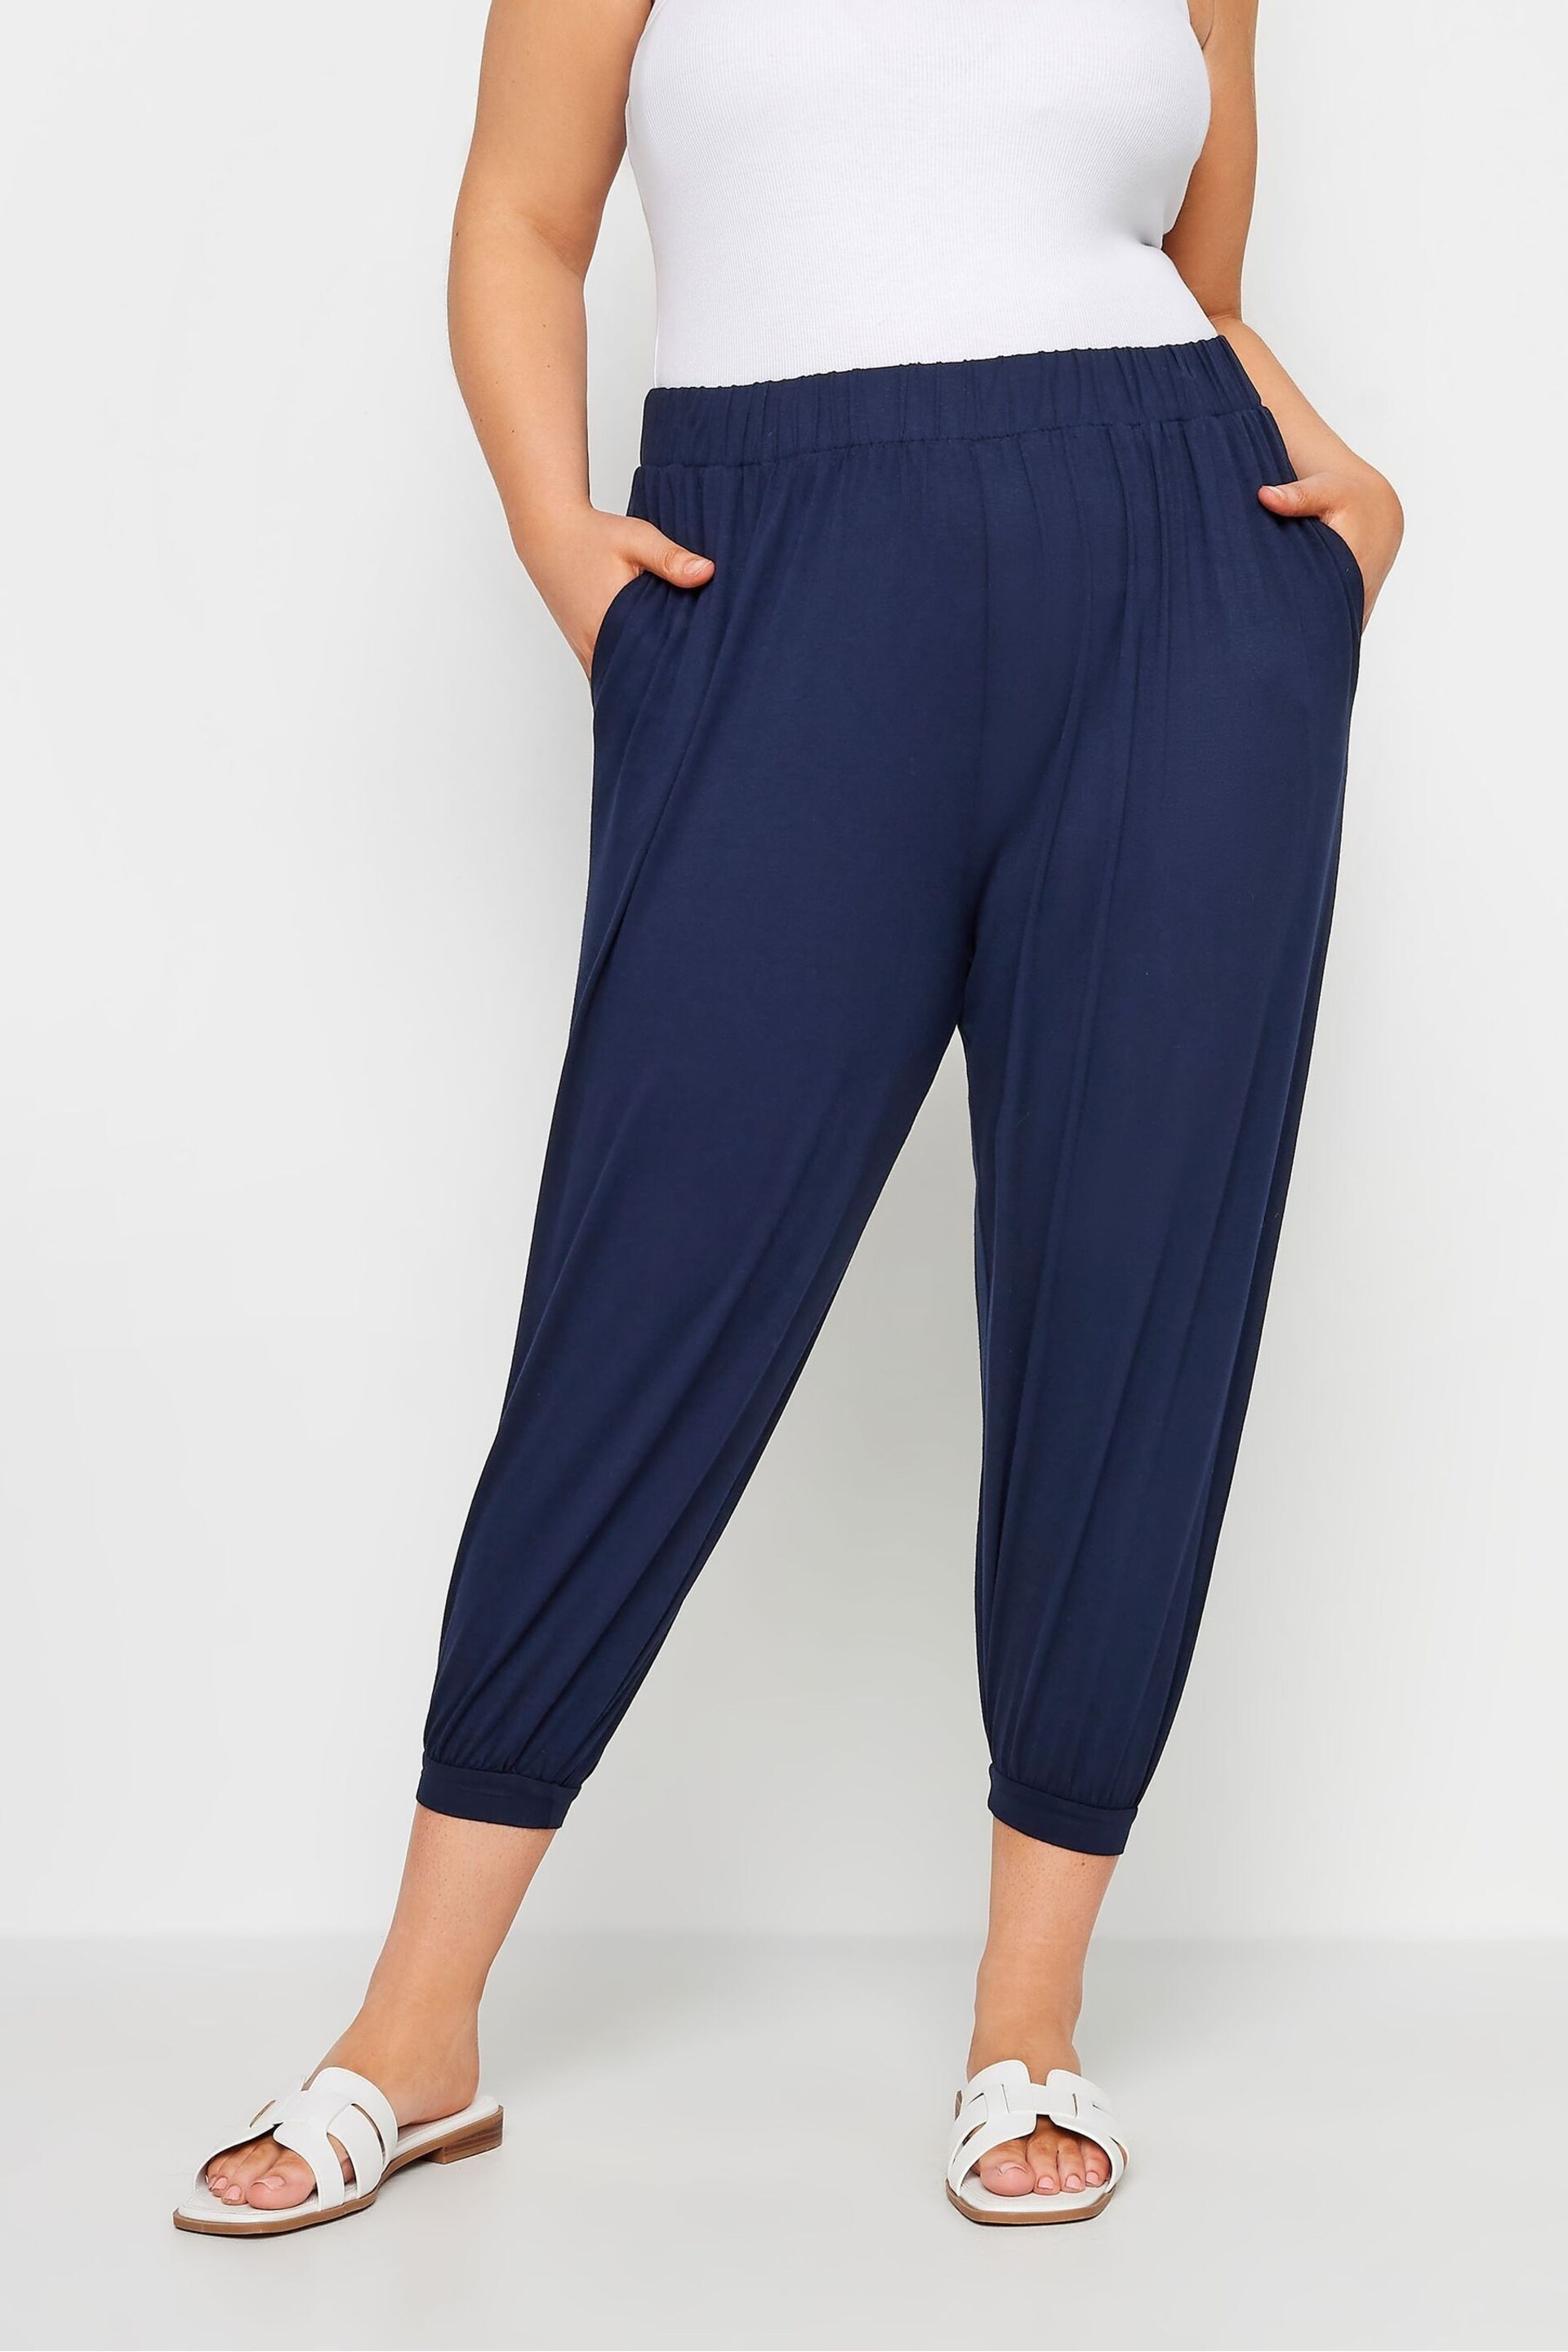 Yours Curve Blue Cropped Harem Trousers - Image 1 of 5